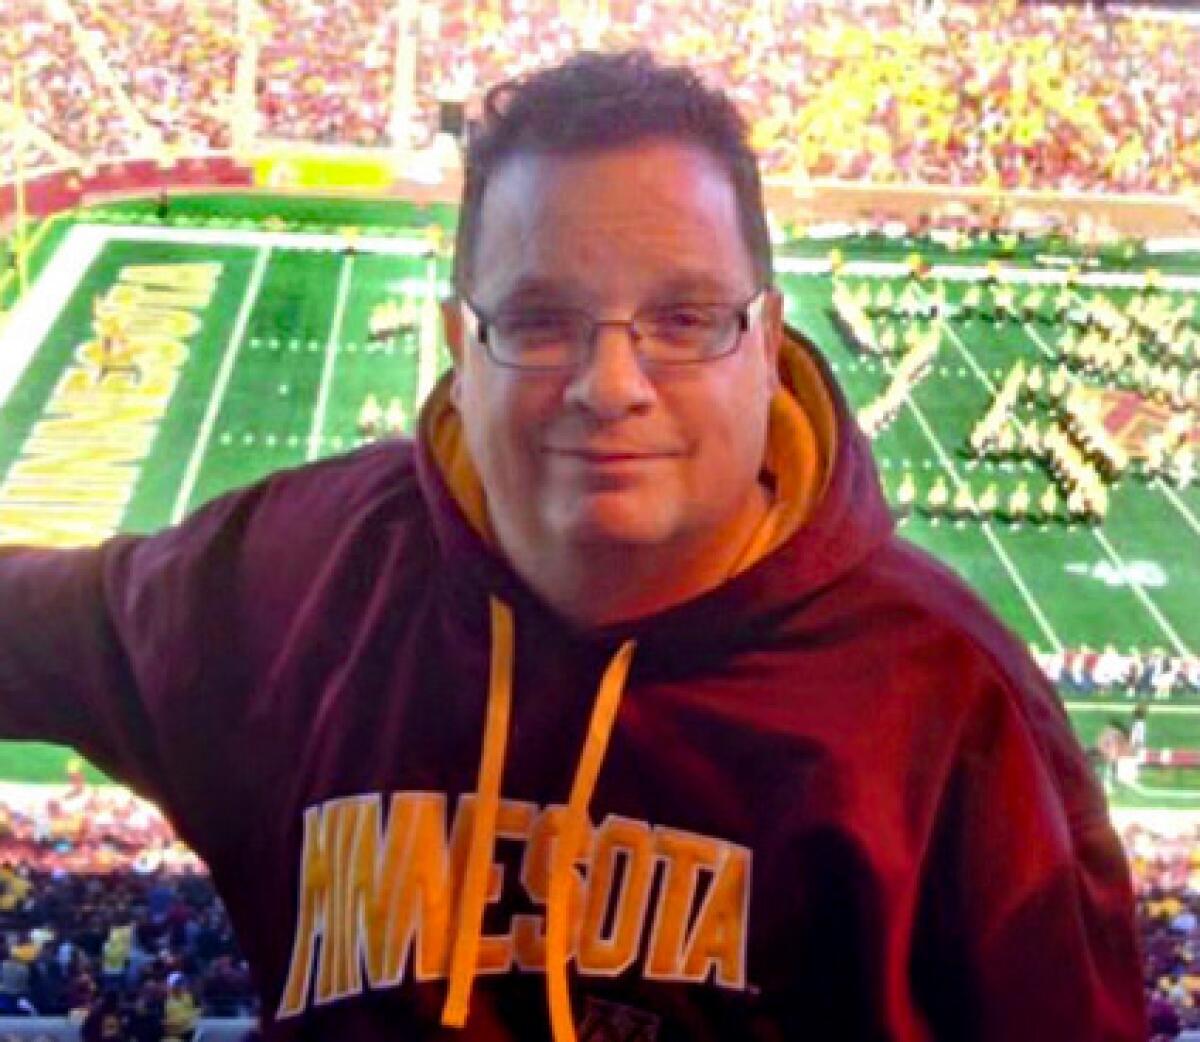 Greg Flugaur is a well-connected Minnesota fan was the first to report USC’s interest in joining the Big Ten.